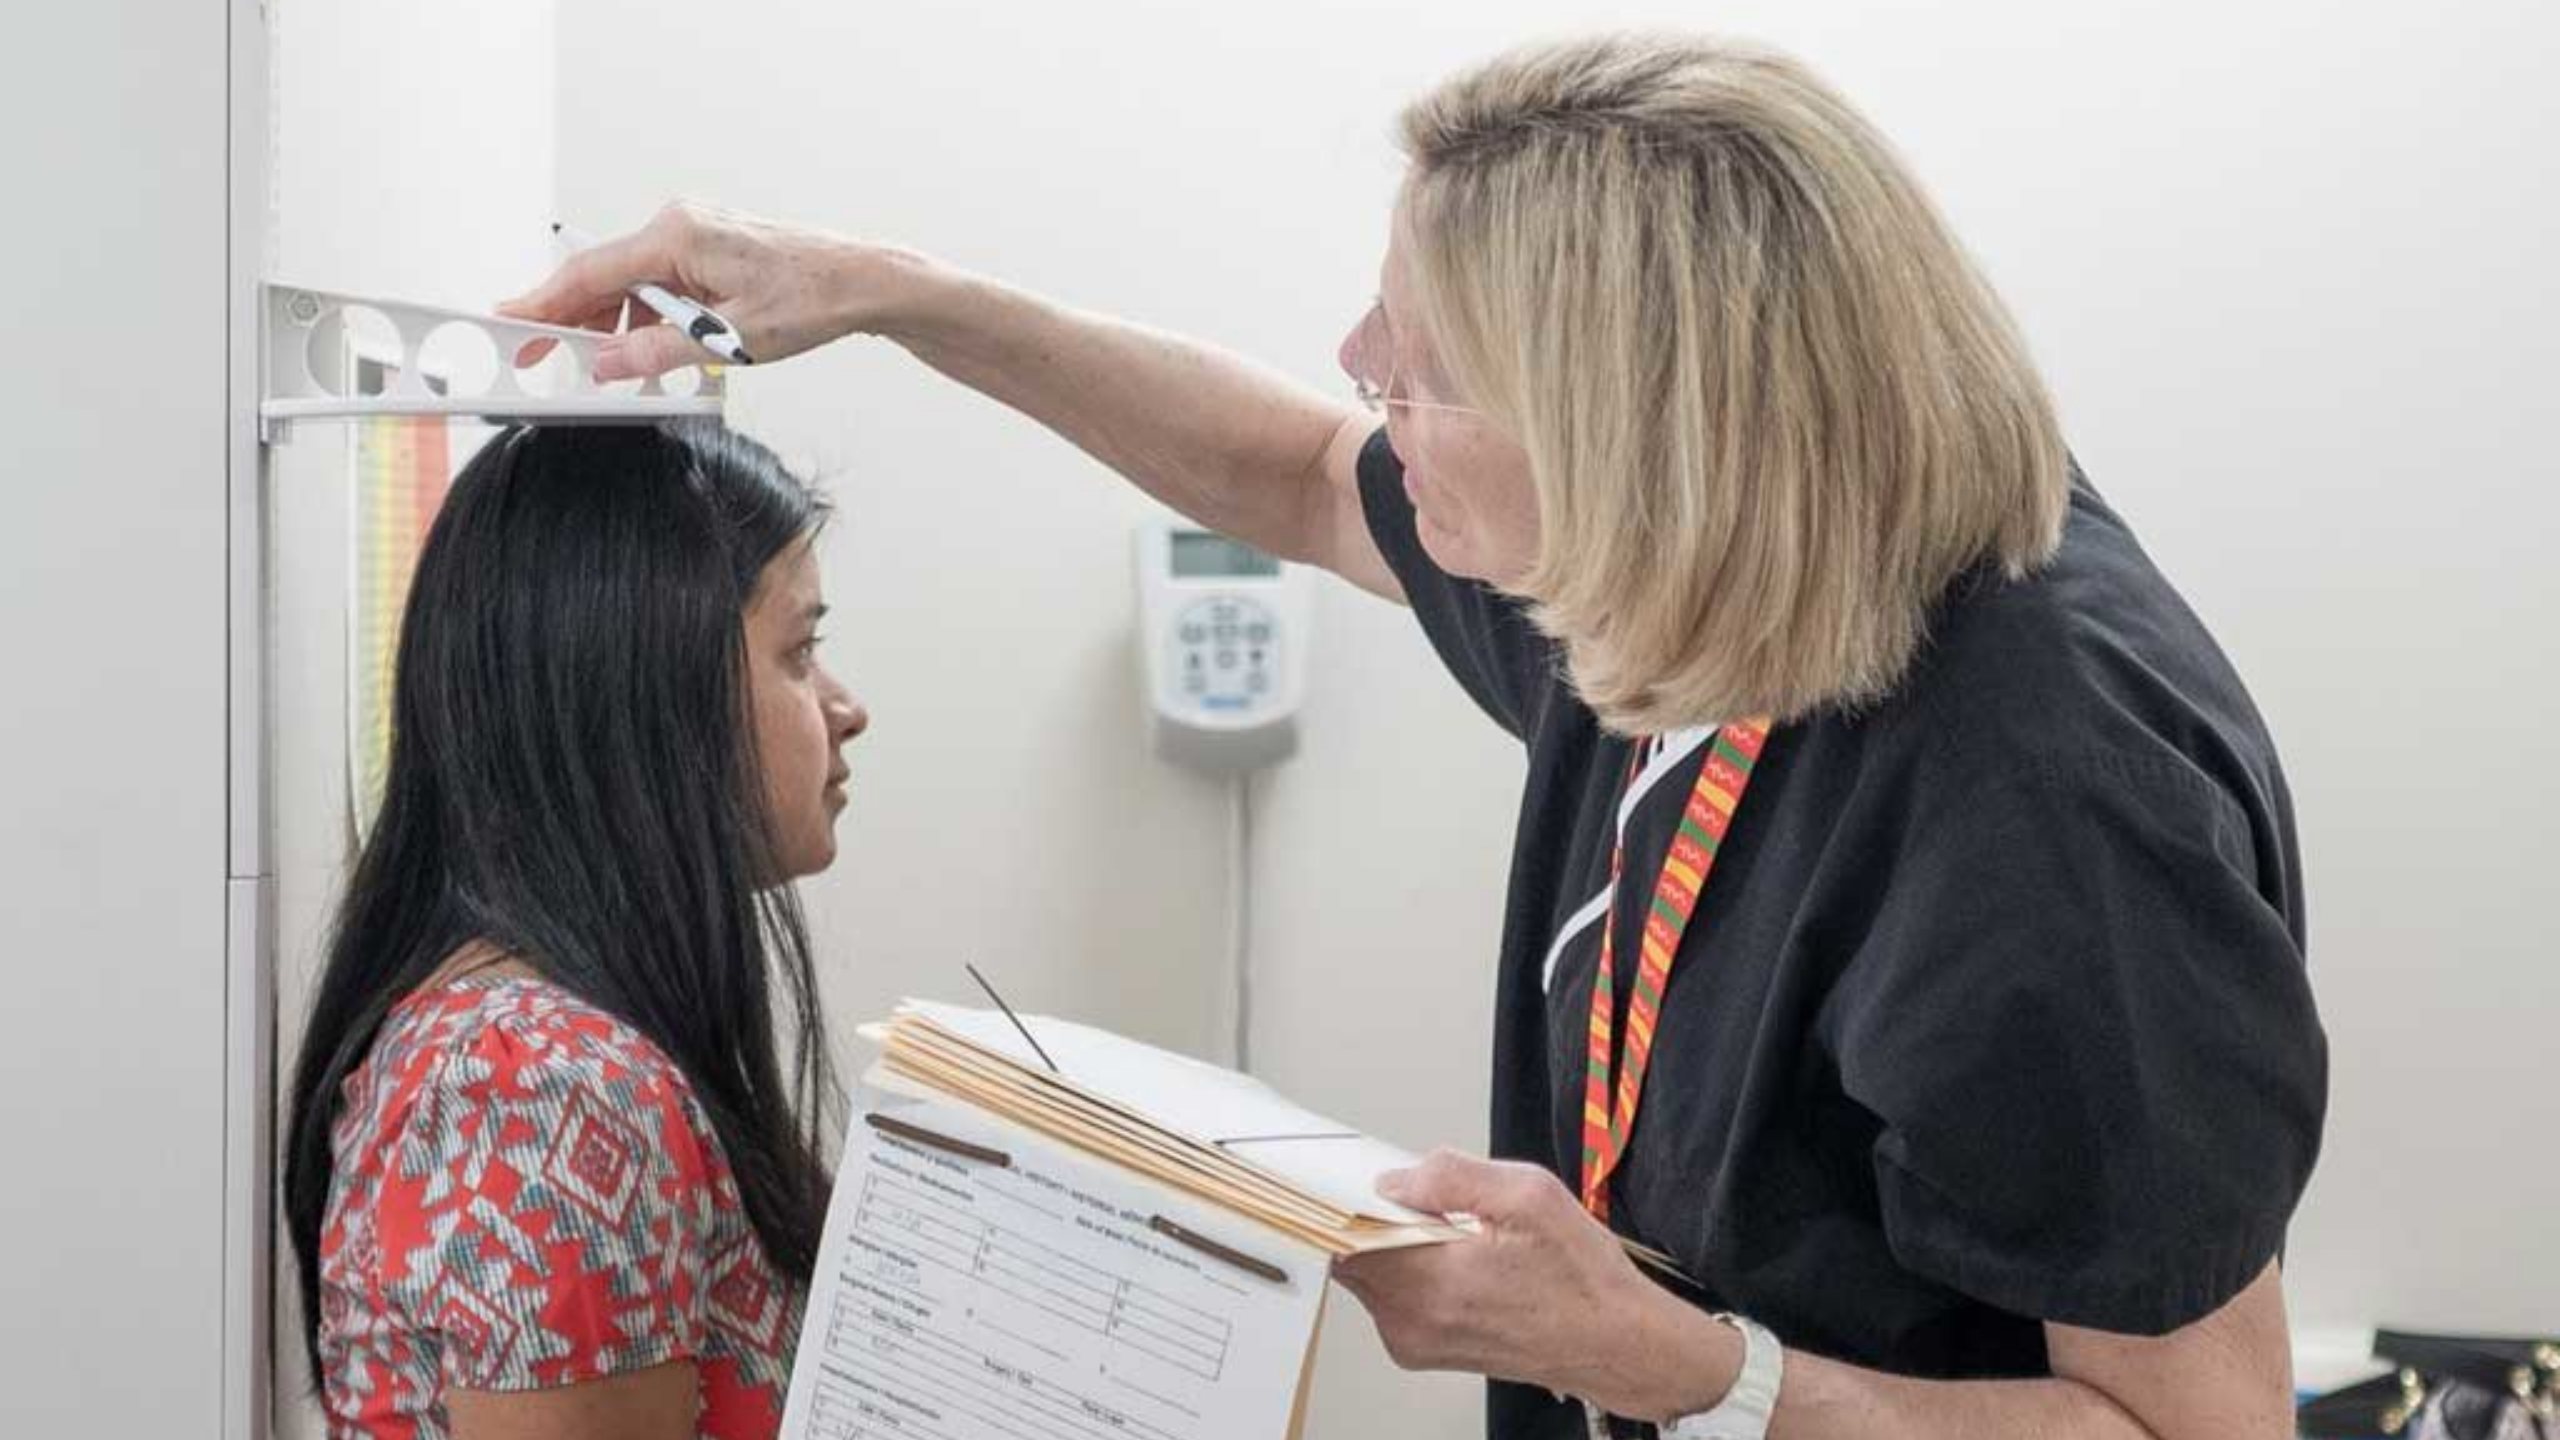 A woman getting her height measured at a doctor's office